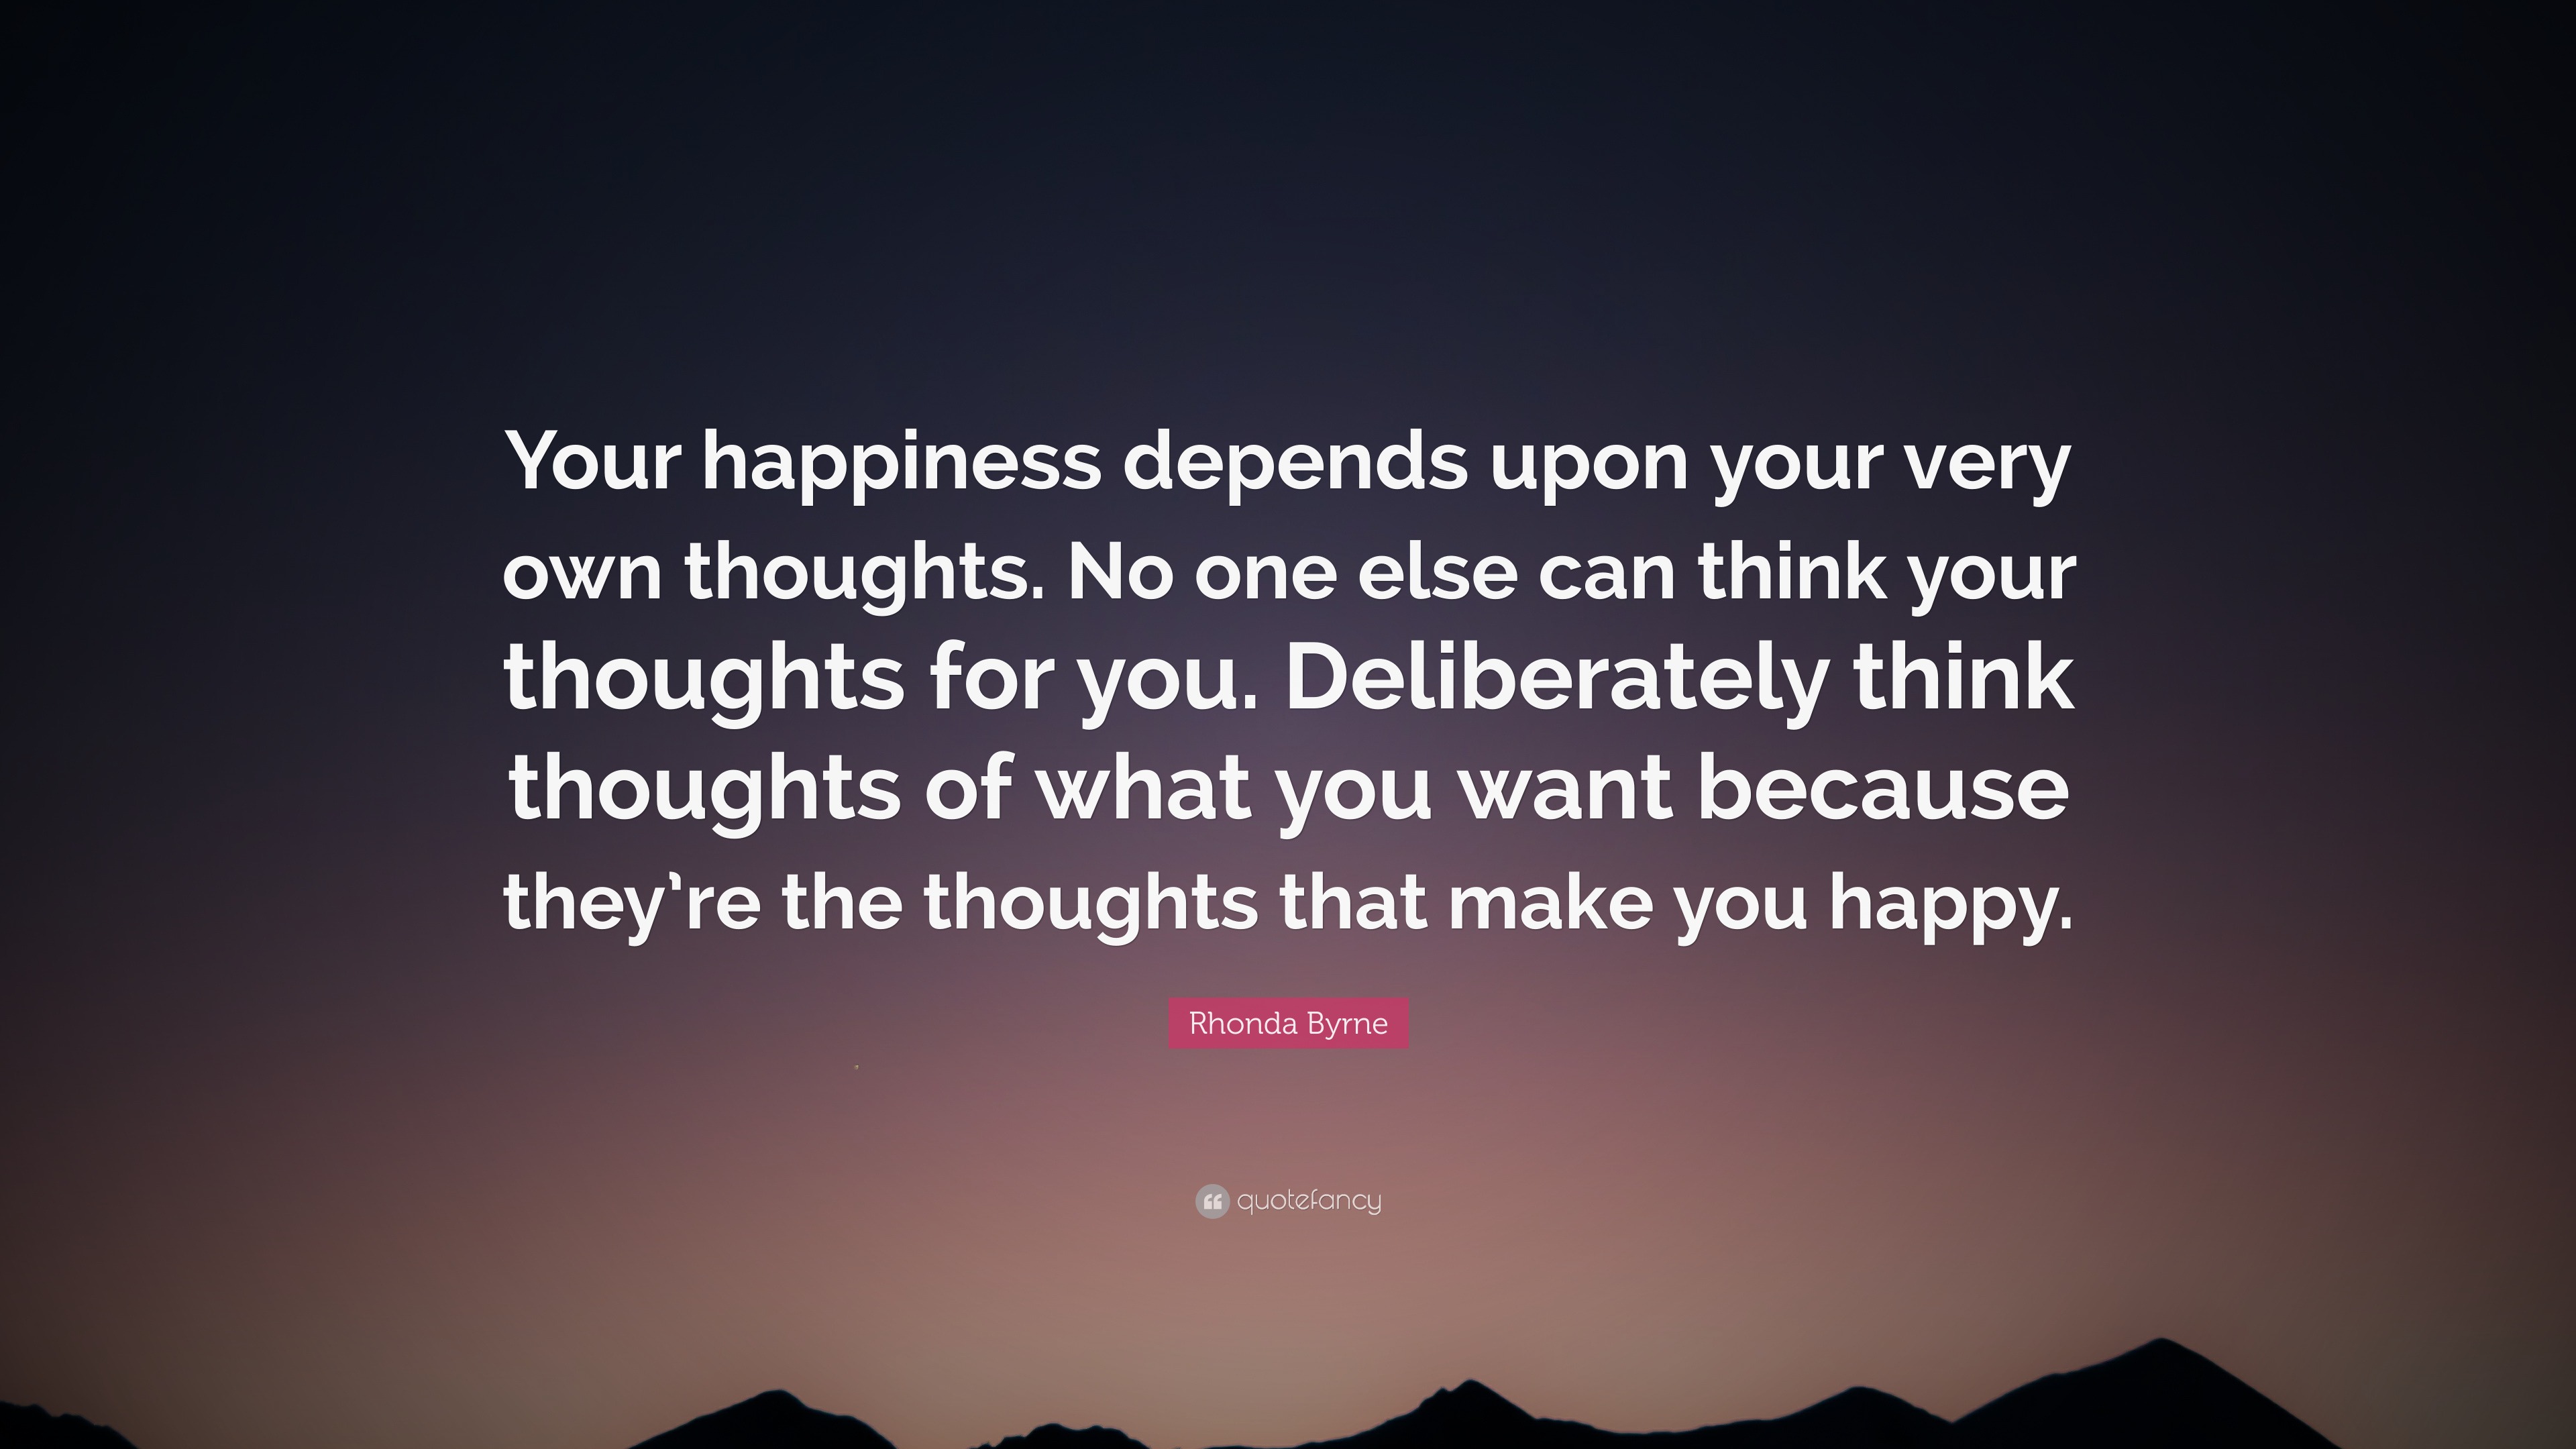 Rhonda Byrne Quote: "Your happiness depends upon your very ...